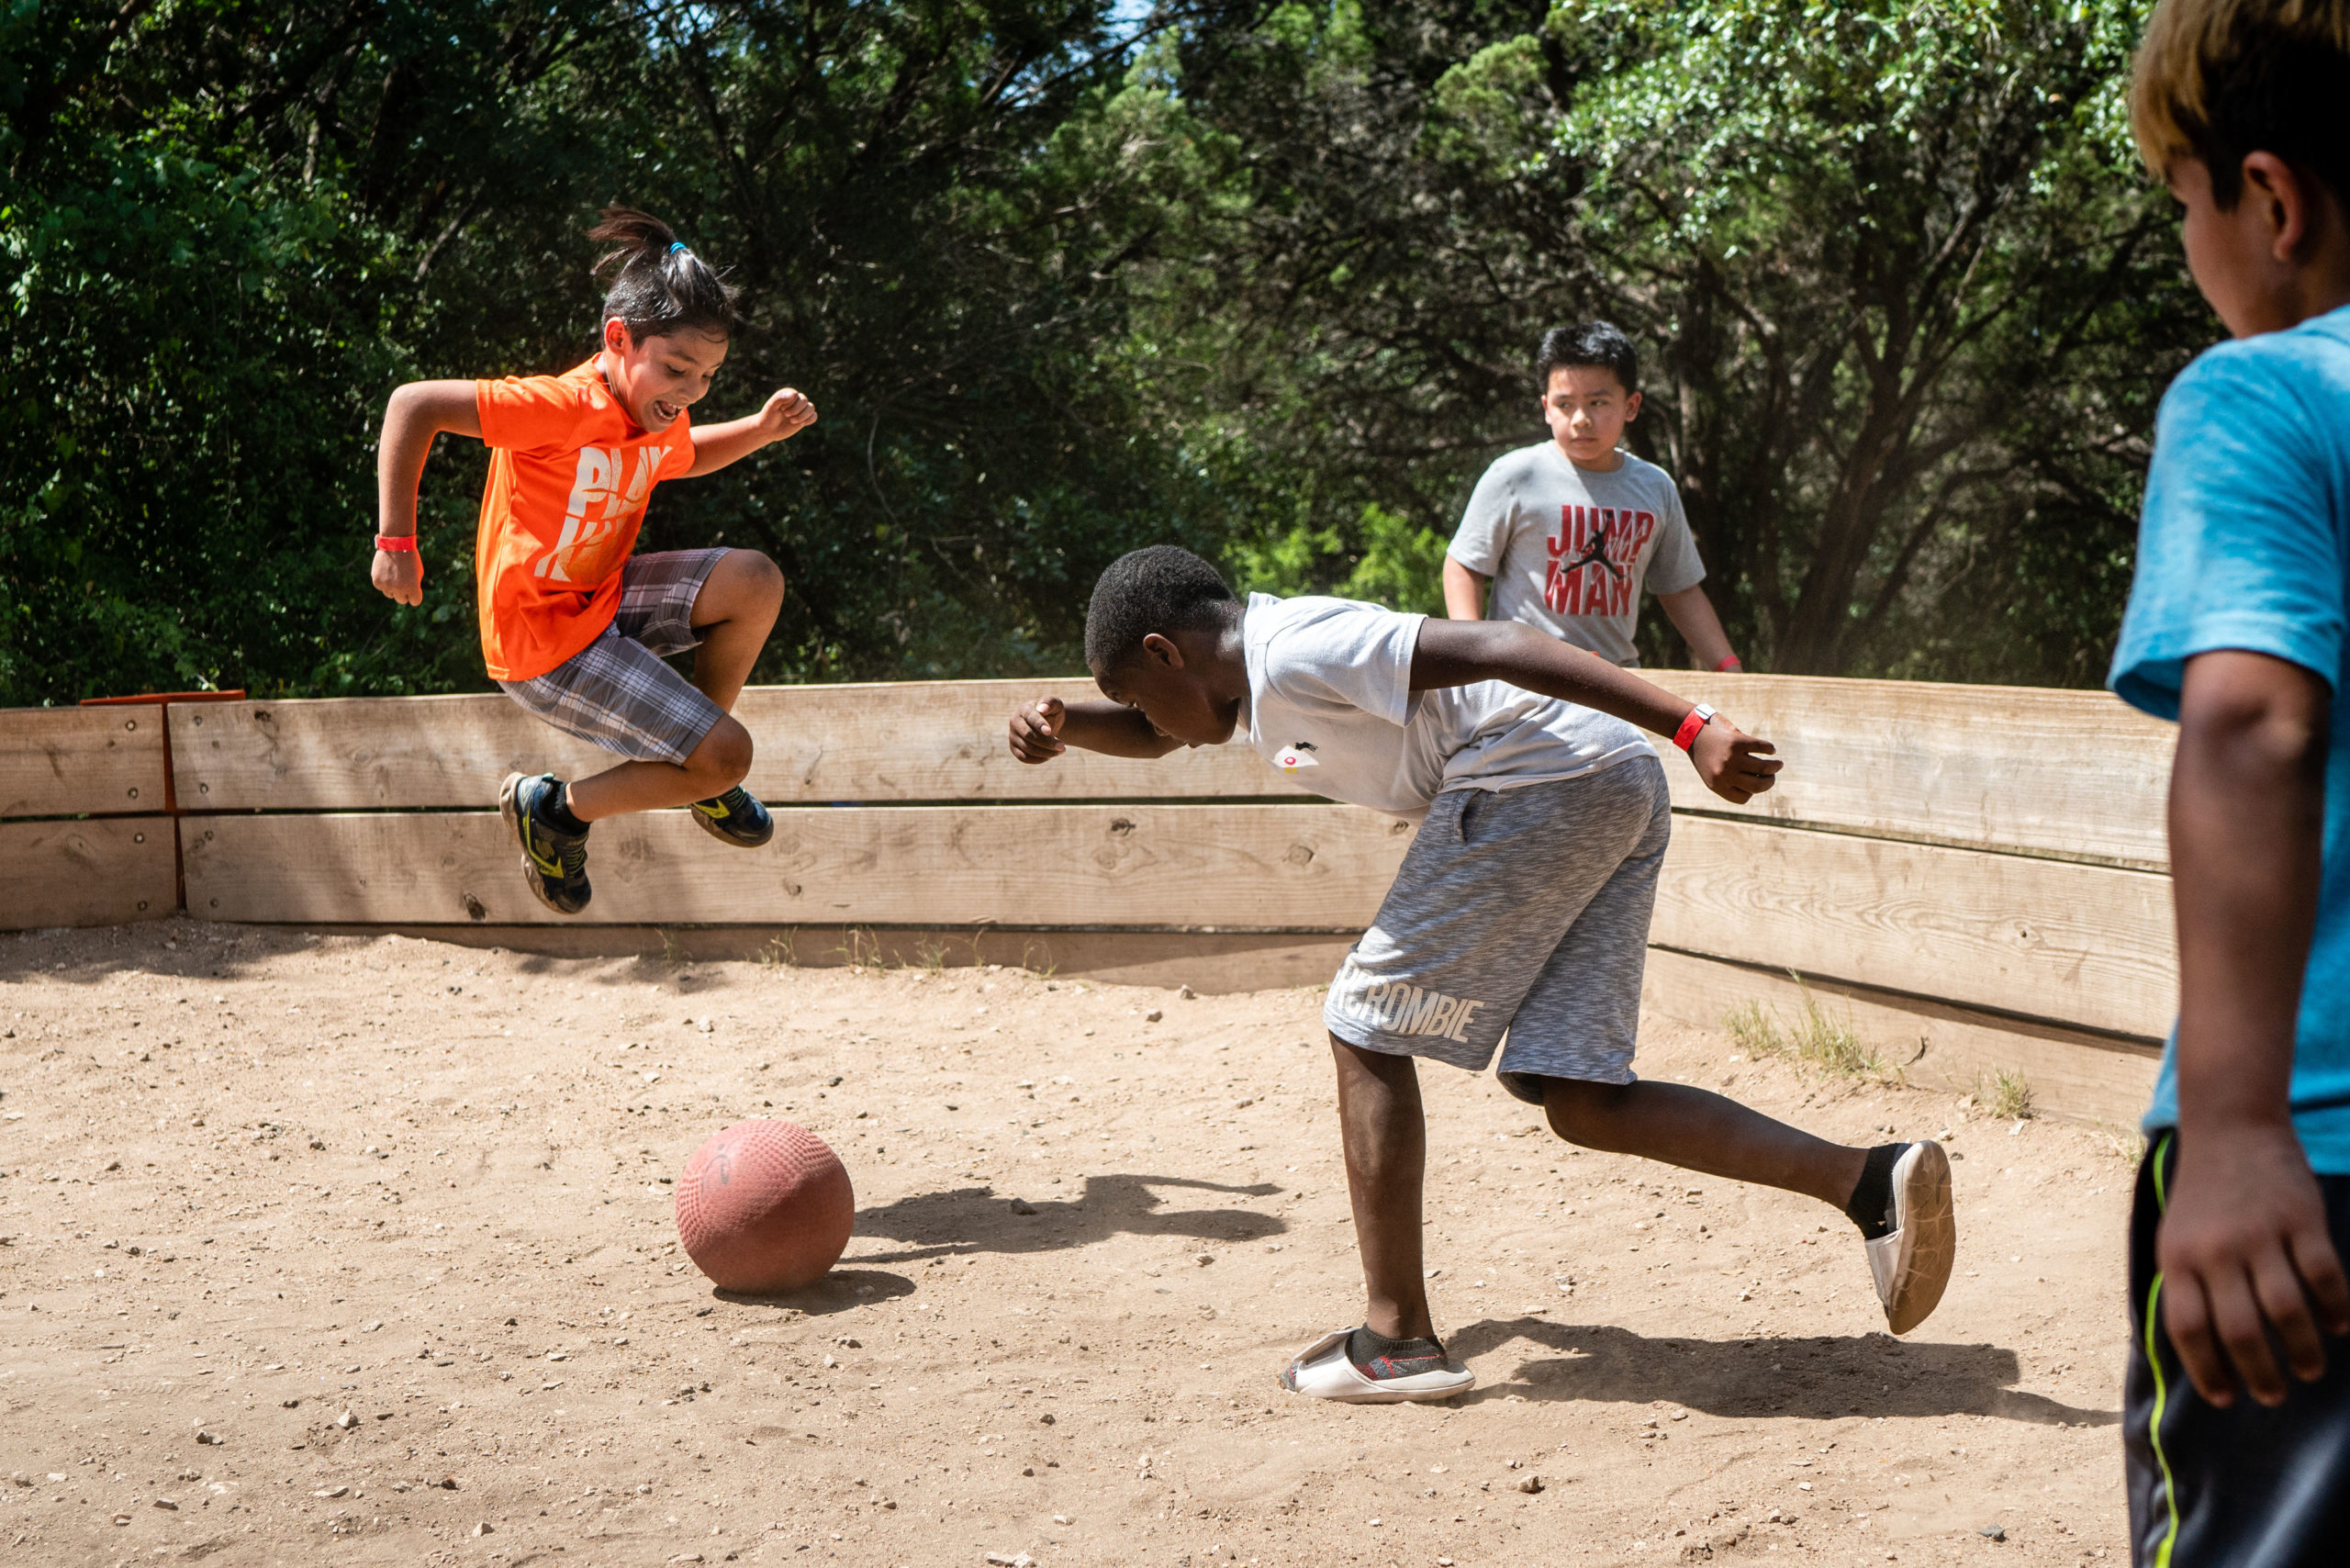 Group of boys playing a game in a sand pit at Austin Sunshine Camps at Zilker Park